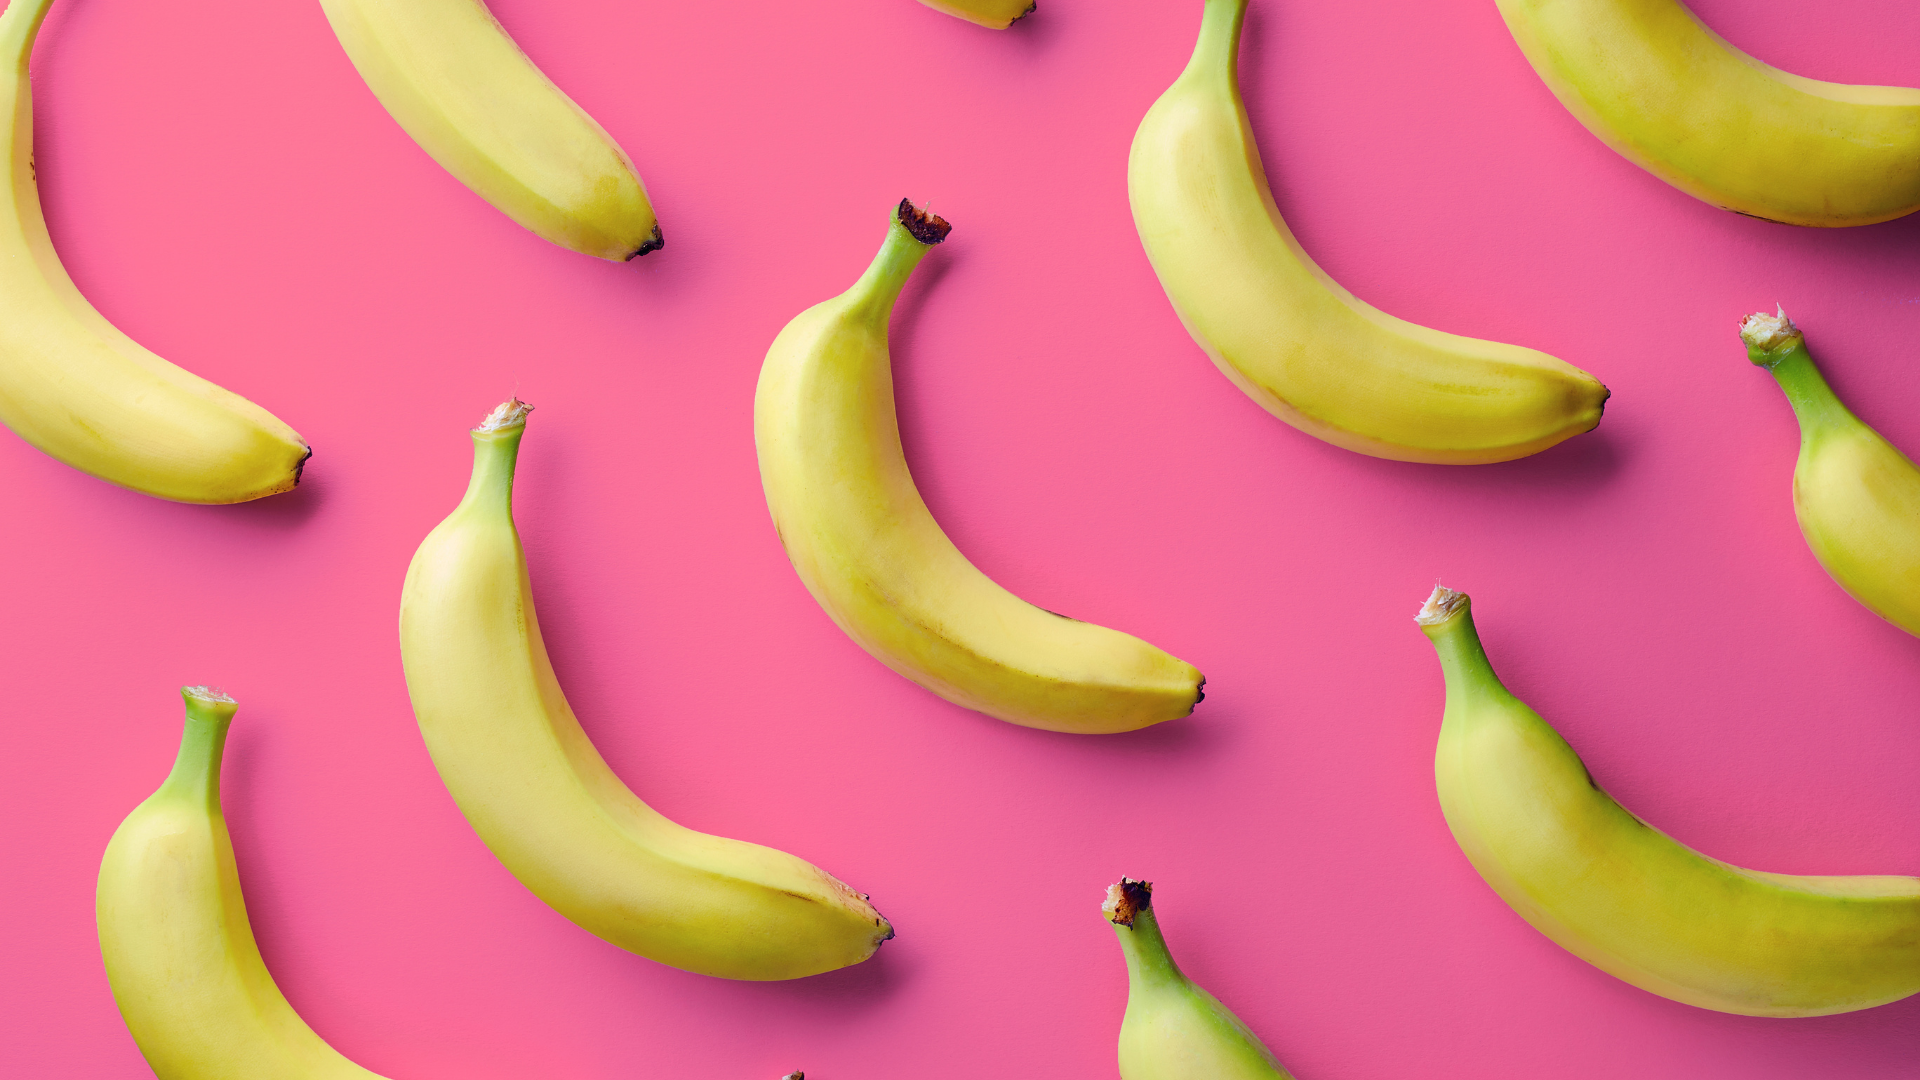 Robinhood Data Security Incident: A Banana In The Tailpipe